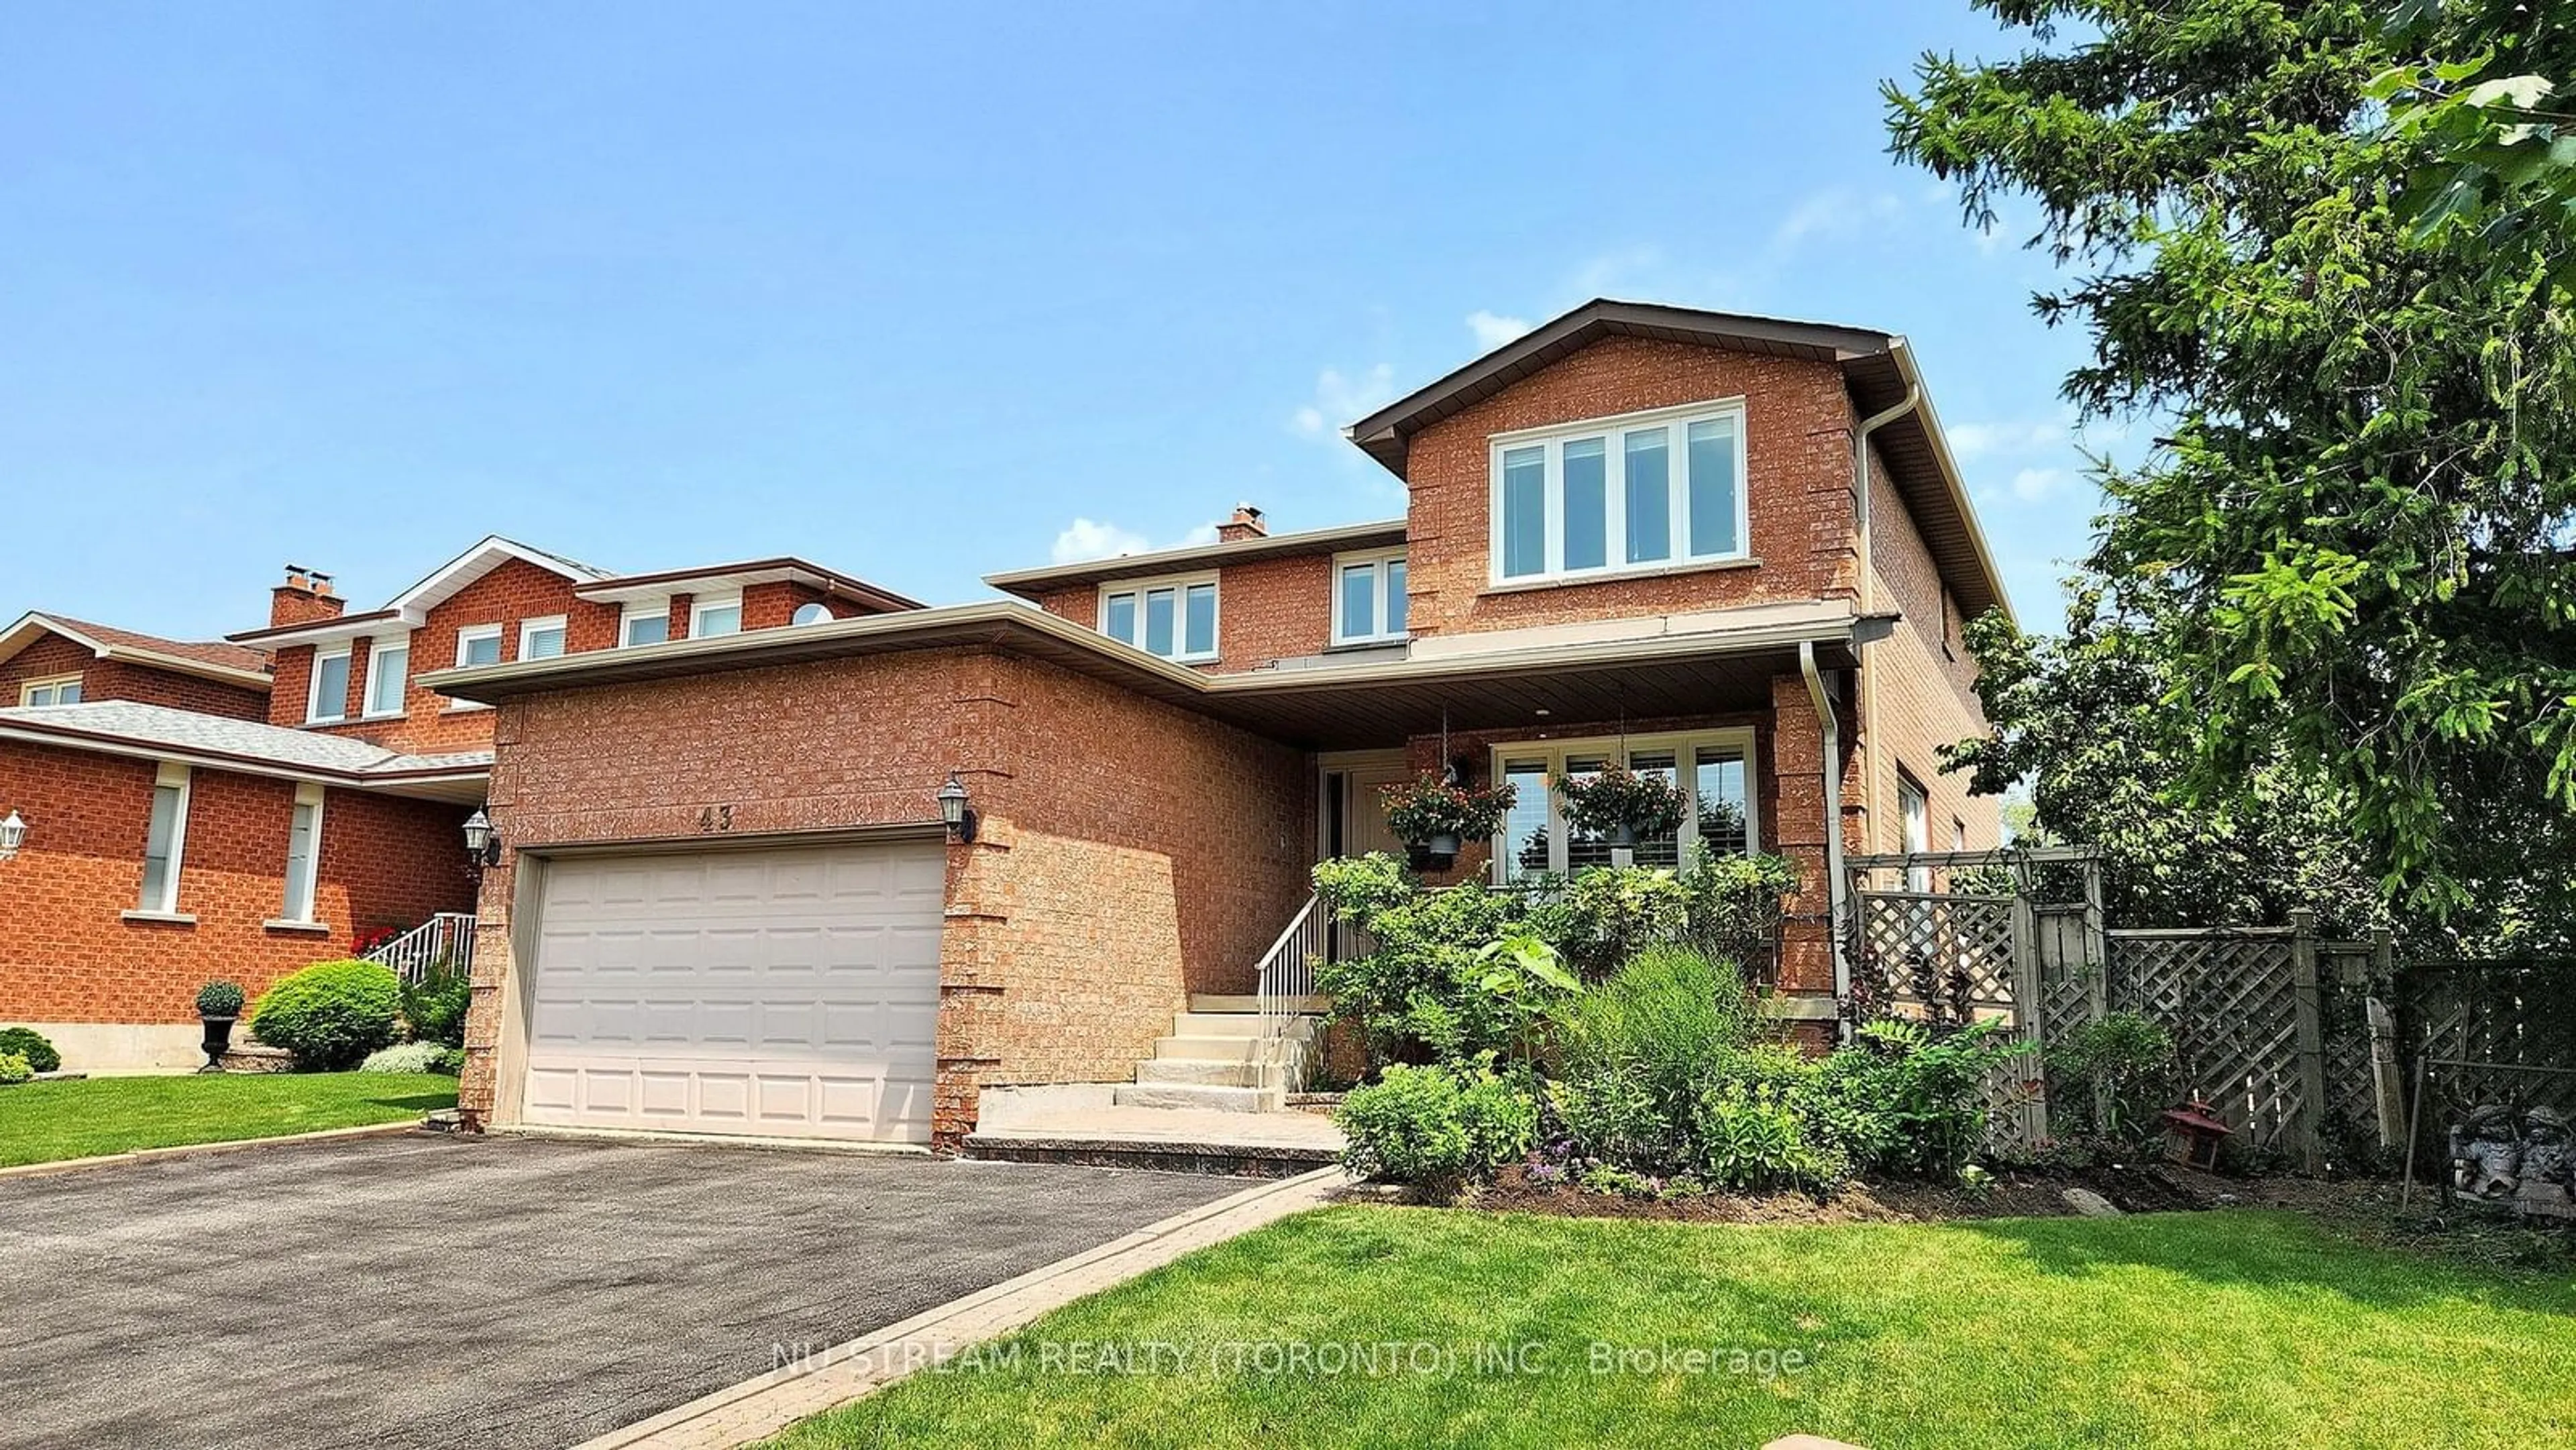 Home with brick exterior material for 43 Kaiser Dr, Vaughan Ontario L4L 3V2